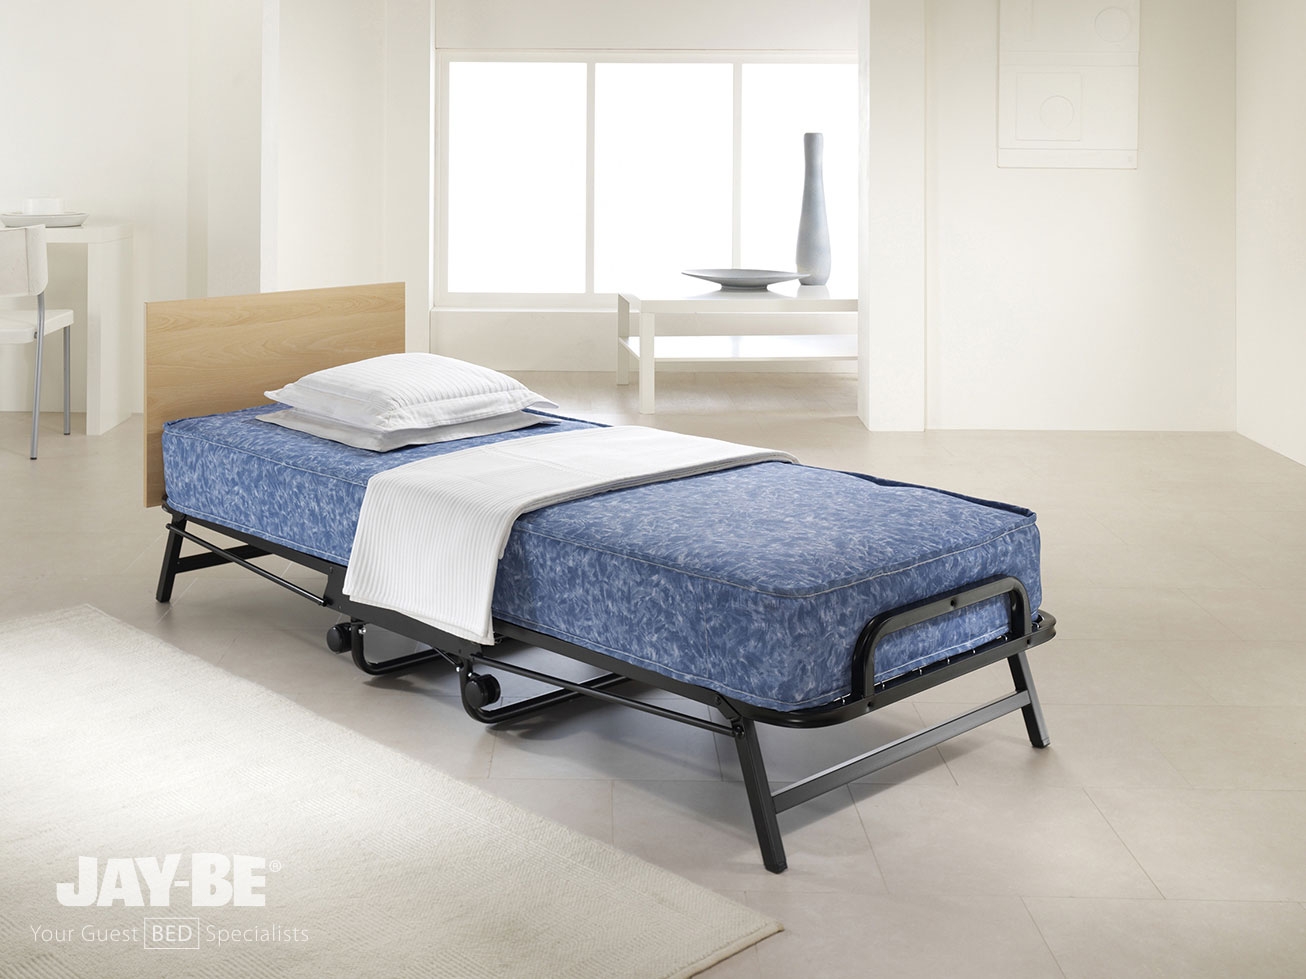 Jay-Be Crown Windermere Single Folding Bed with